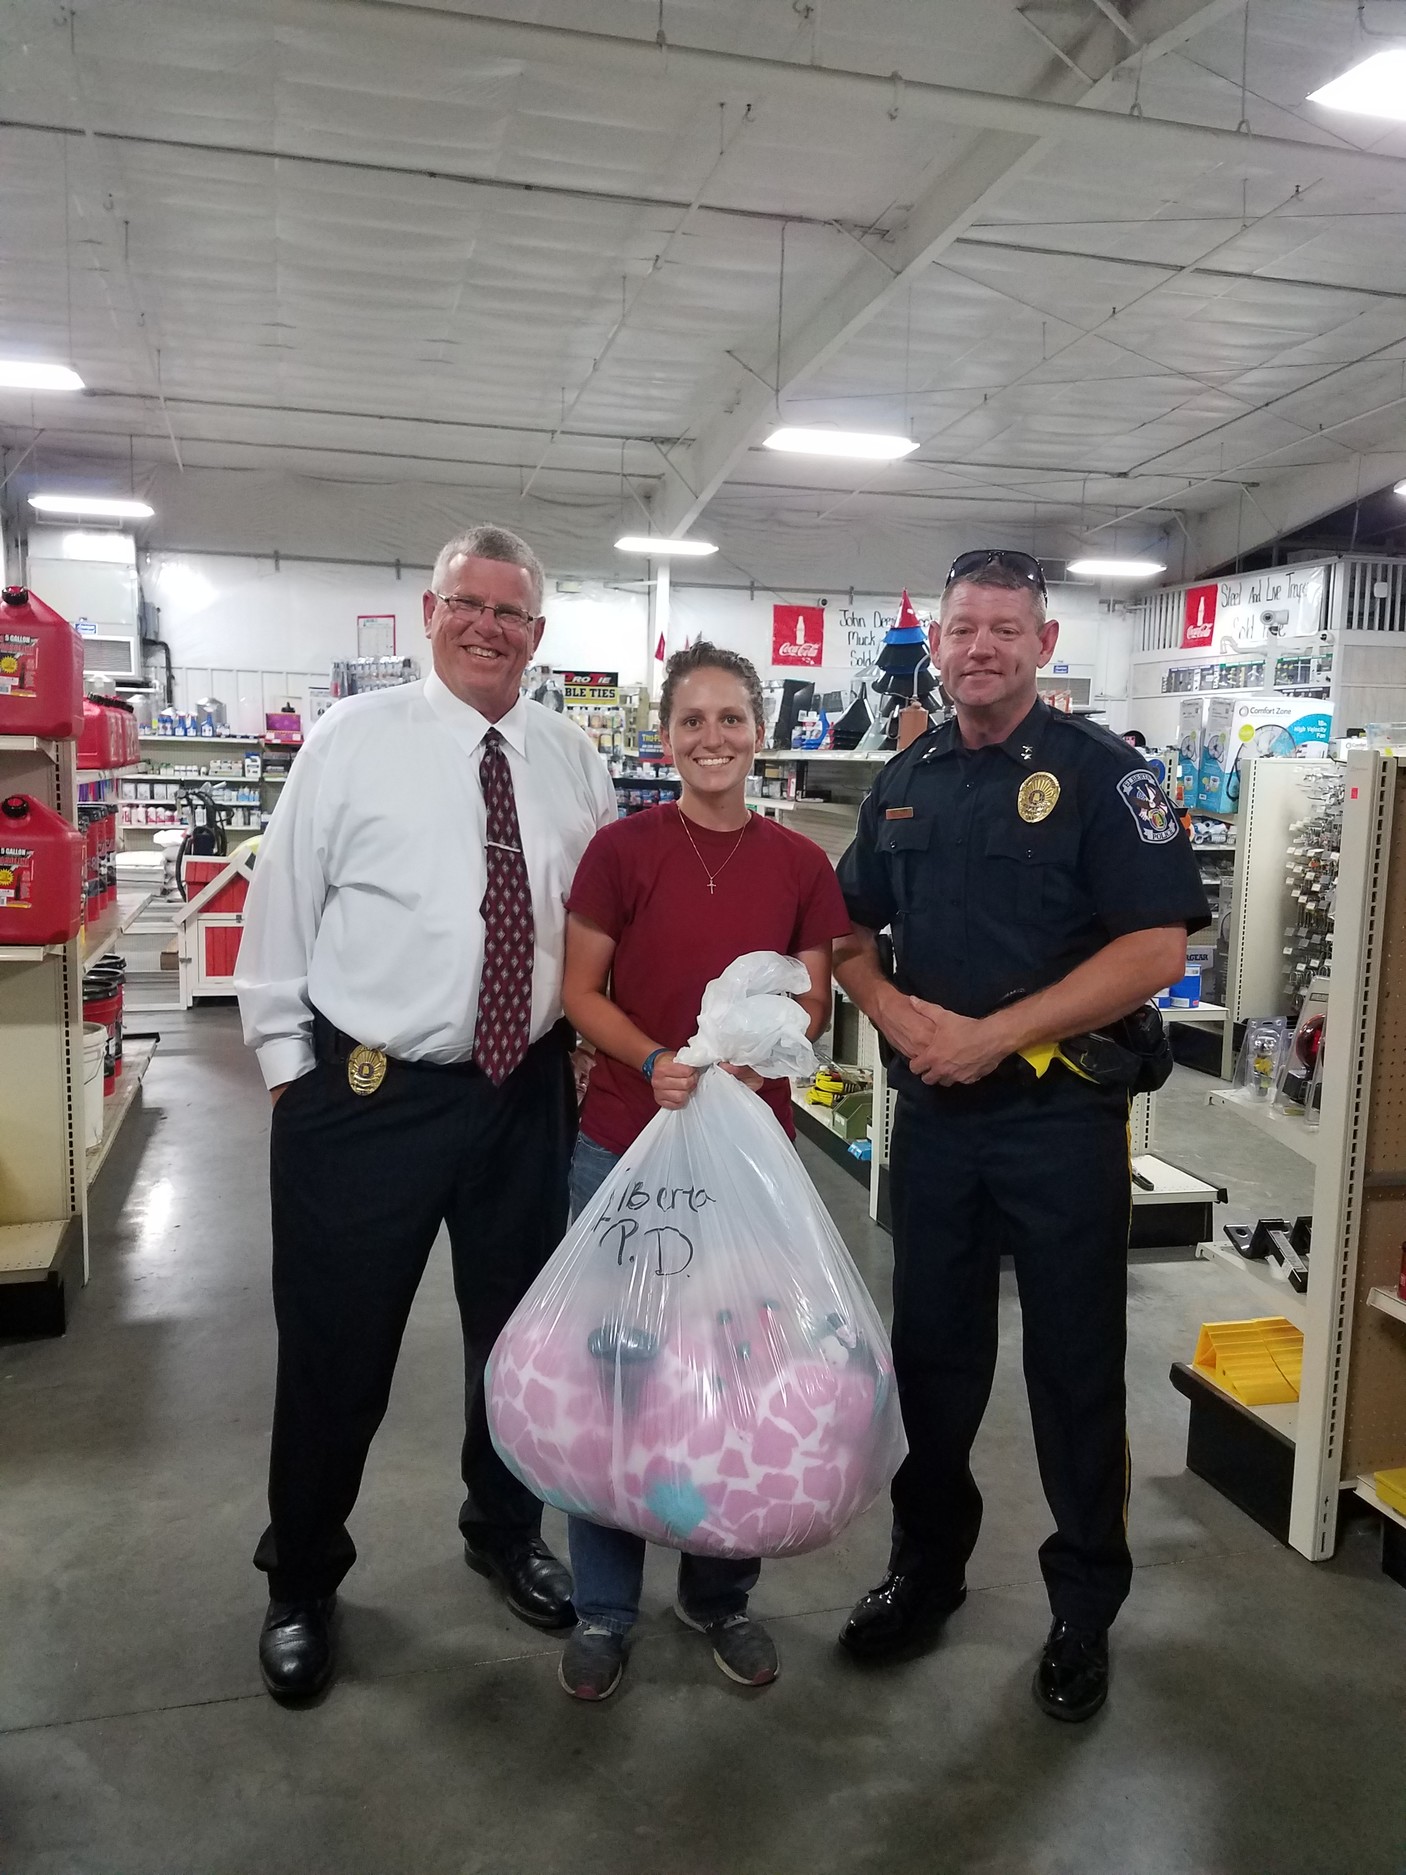 Elberta Police Chief Cliff Roberts, Elberta Farmers Co-Op employee Kristen Edwards, and Elberta Assistant Chief of Police Ryan Pelfrey, along with the bag of donated stuffed animals that was given to the police department.